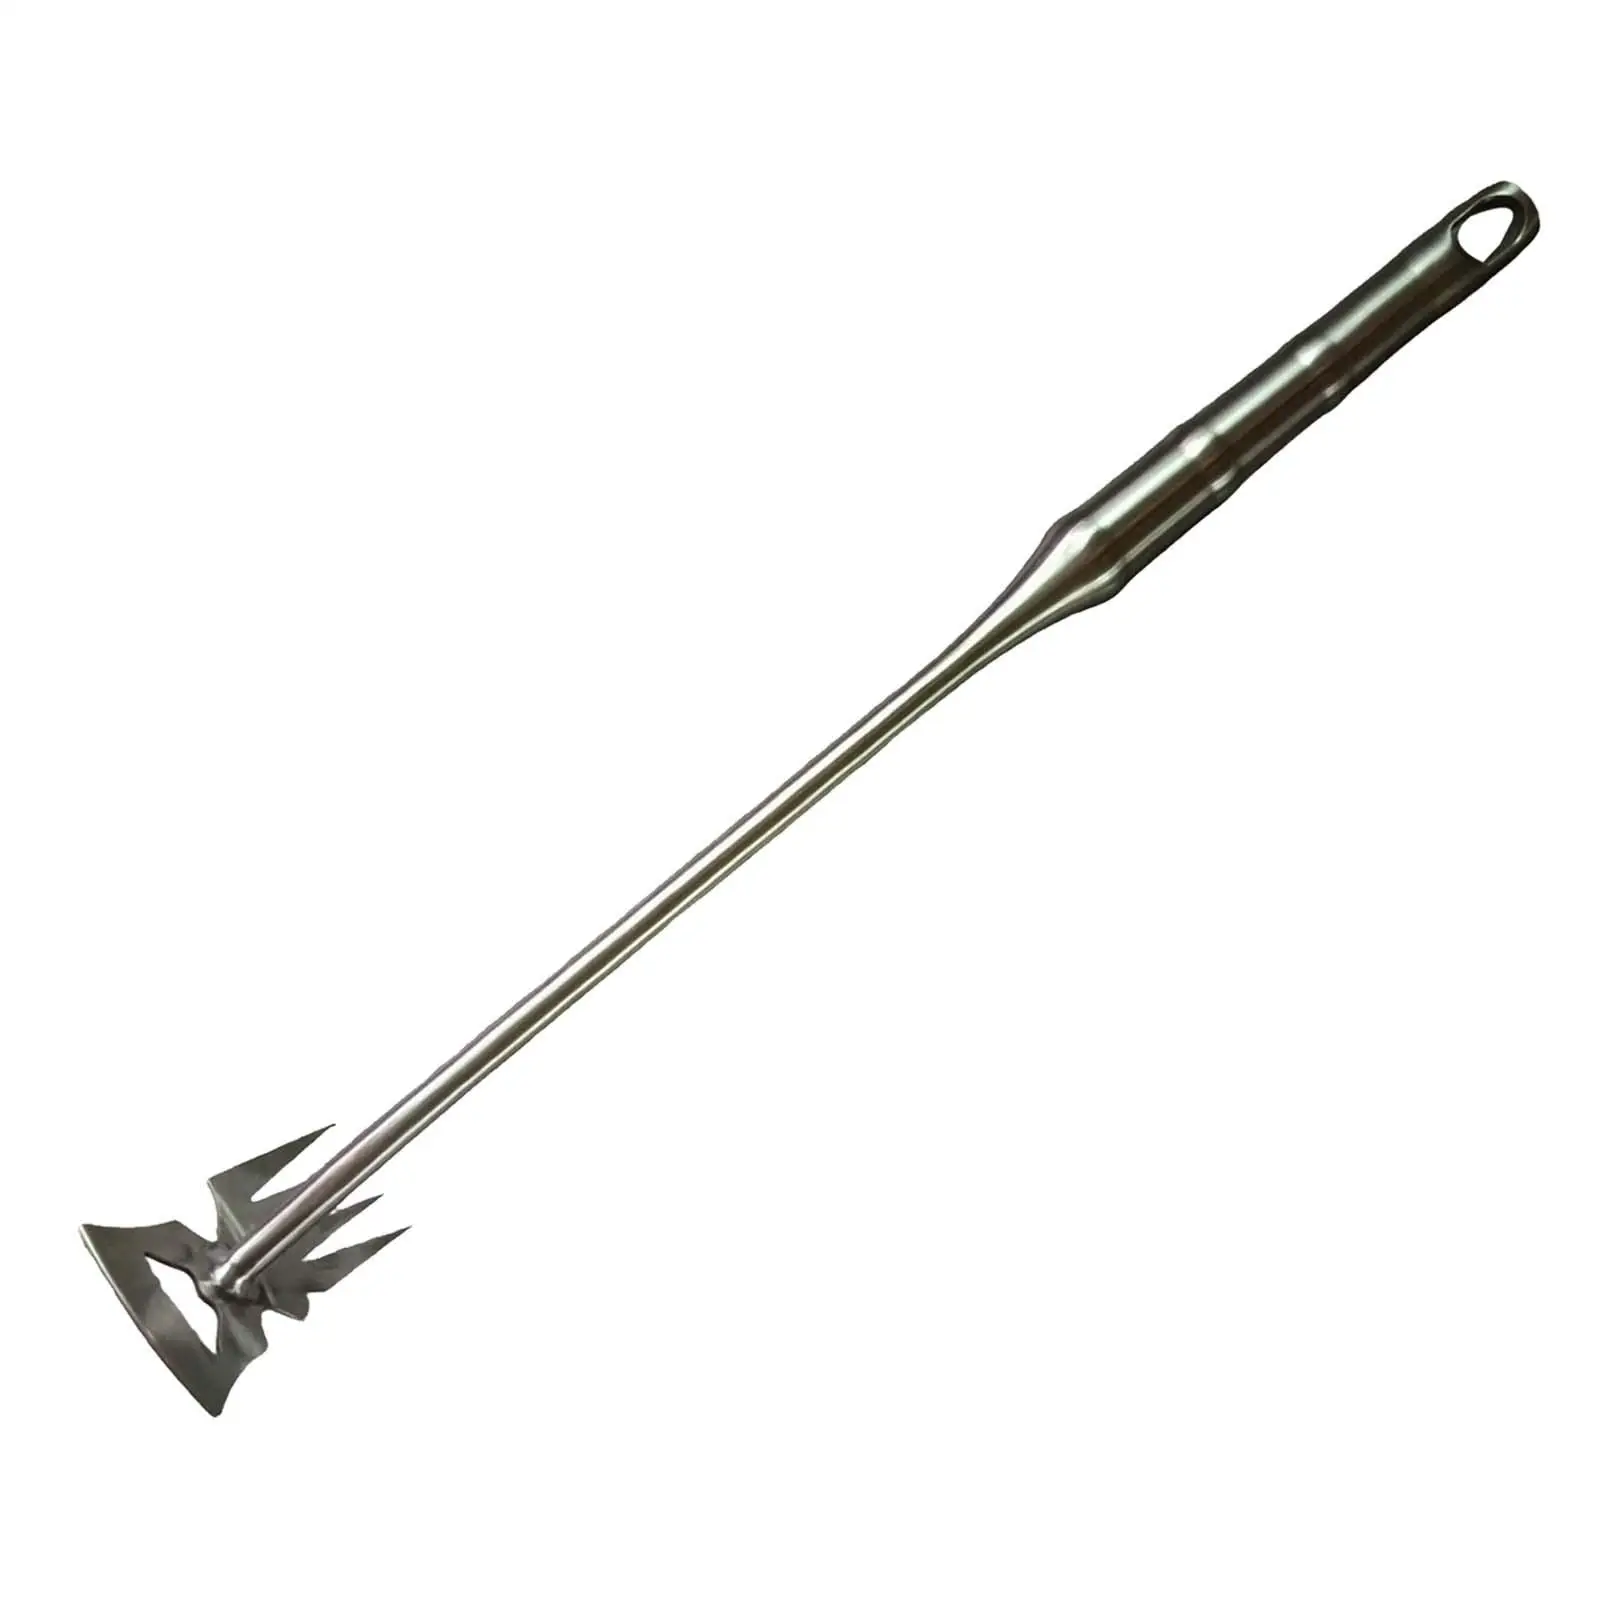 Hand Weeders 5 Tines Digging Tool Lightweight Multifunctional Weeder for Farm Weeding Remover Tool for Lawn Loose Soil Backyard